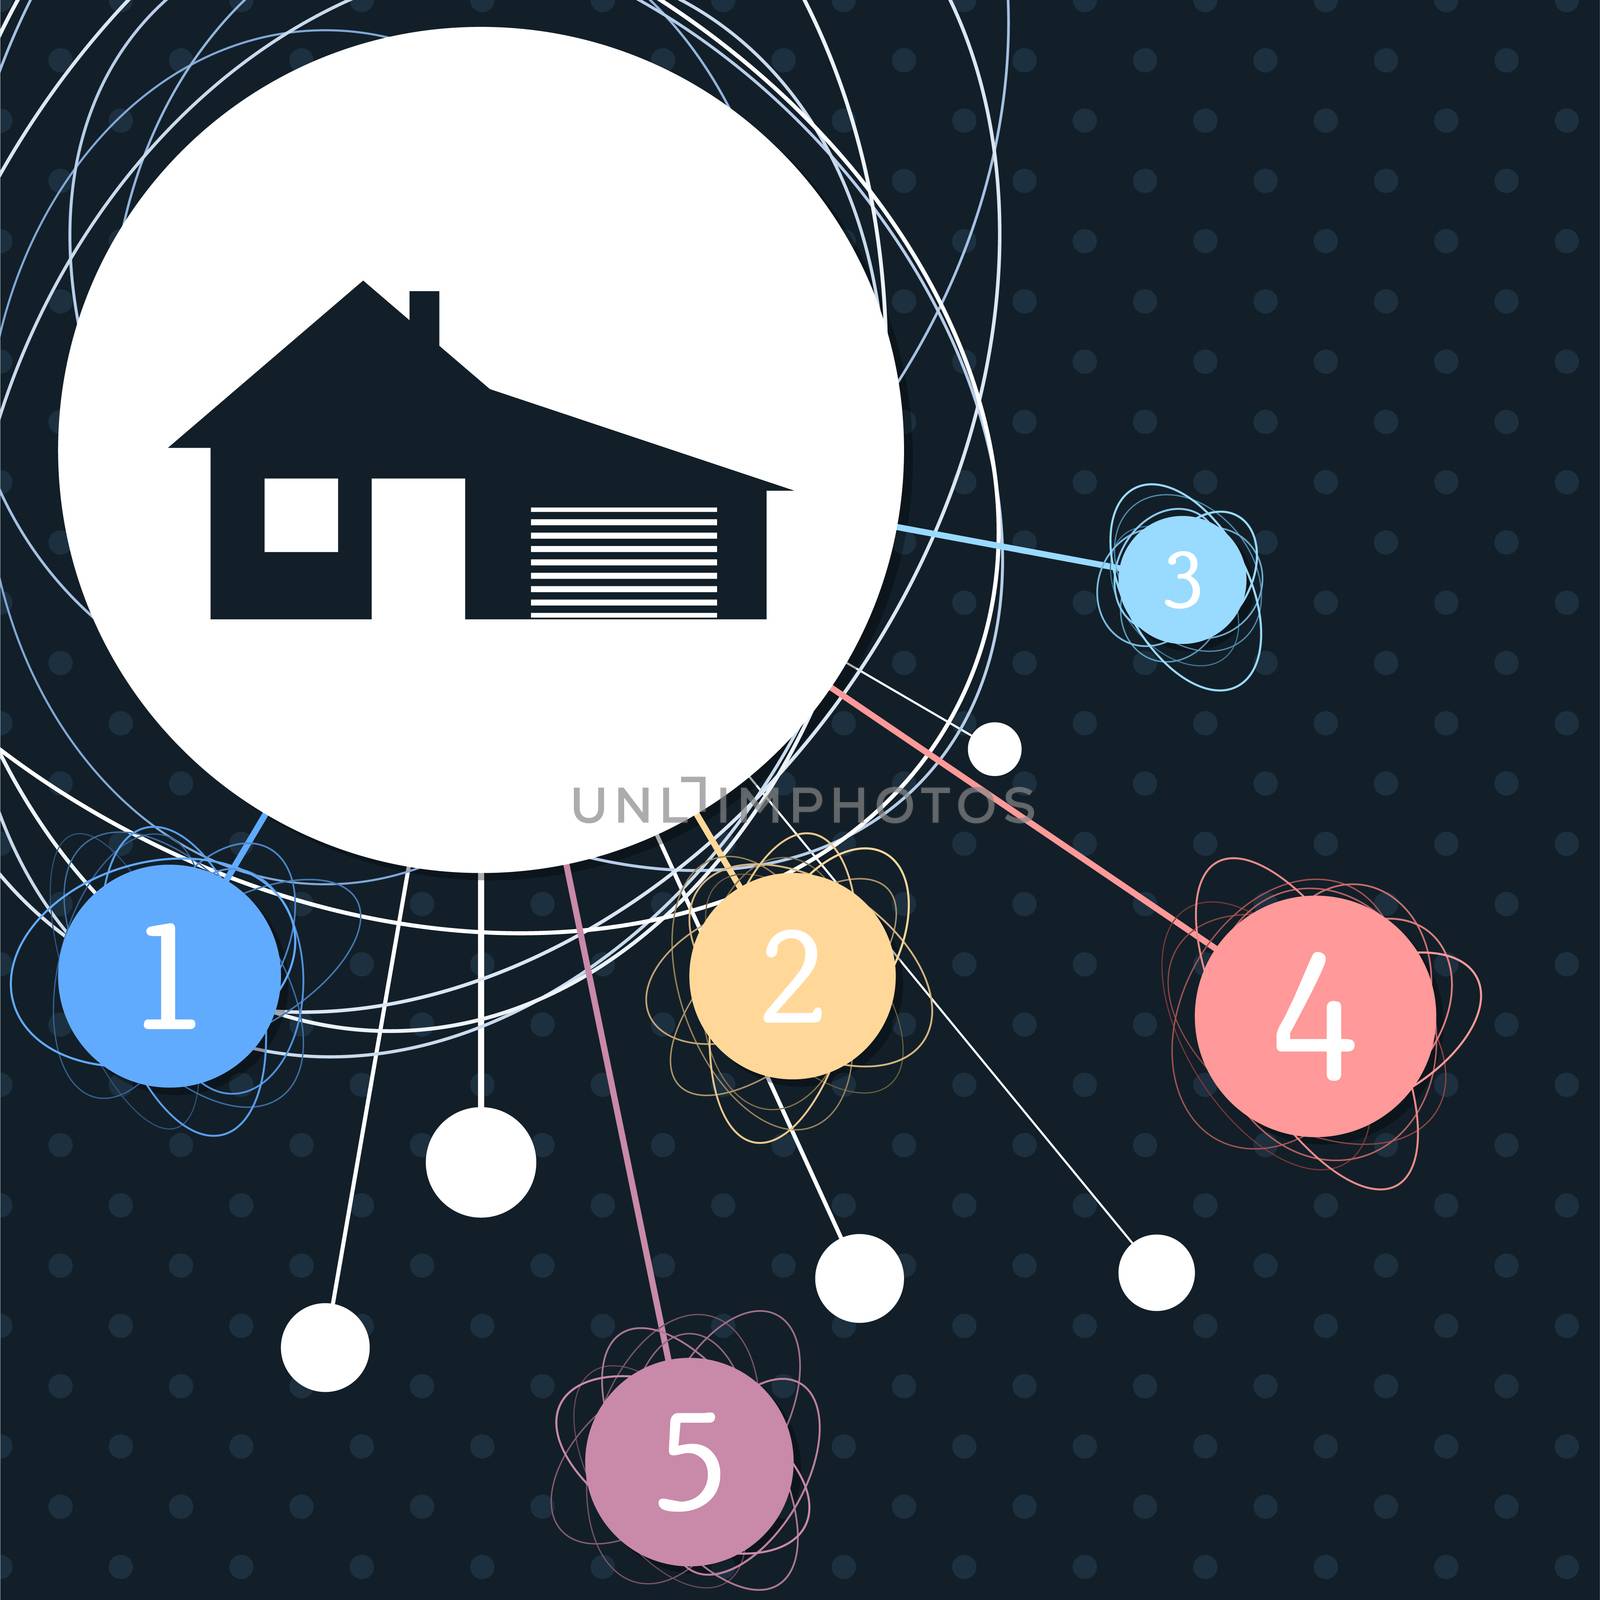 house with garage icon with the background to the point and with infographic style. illustration